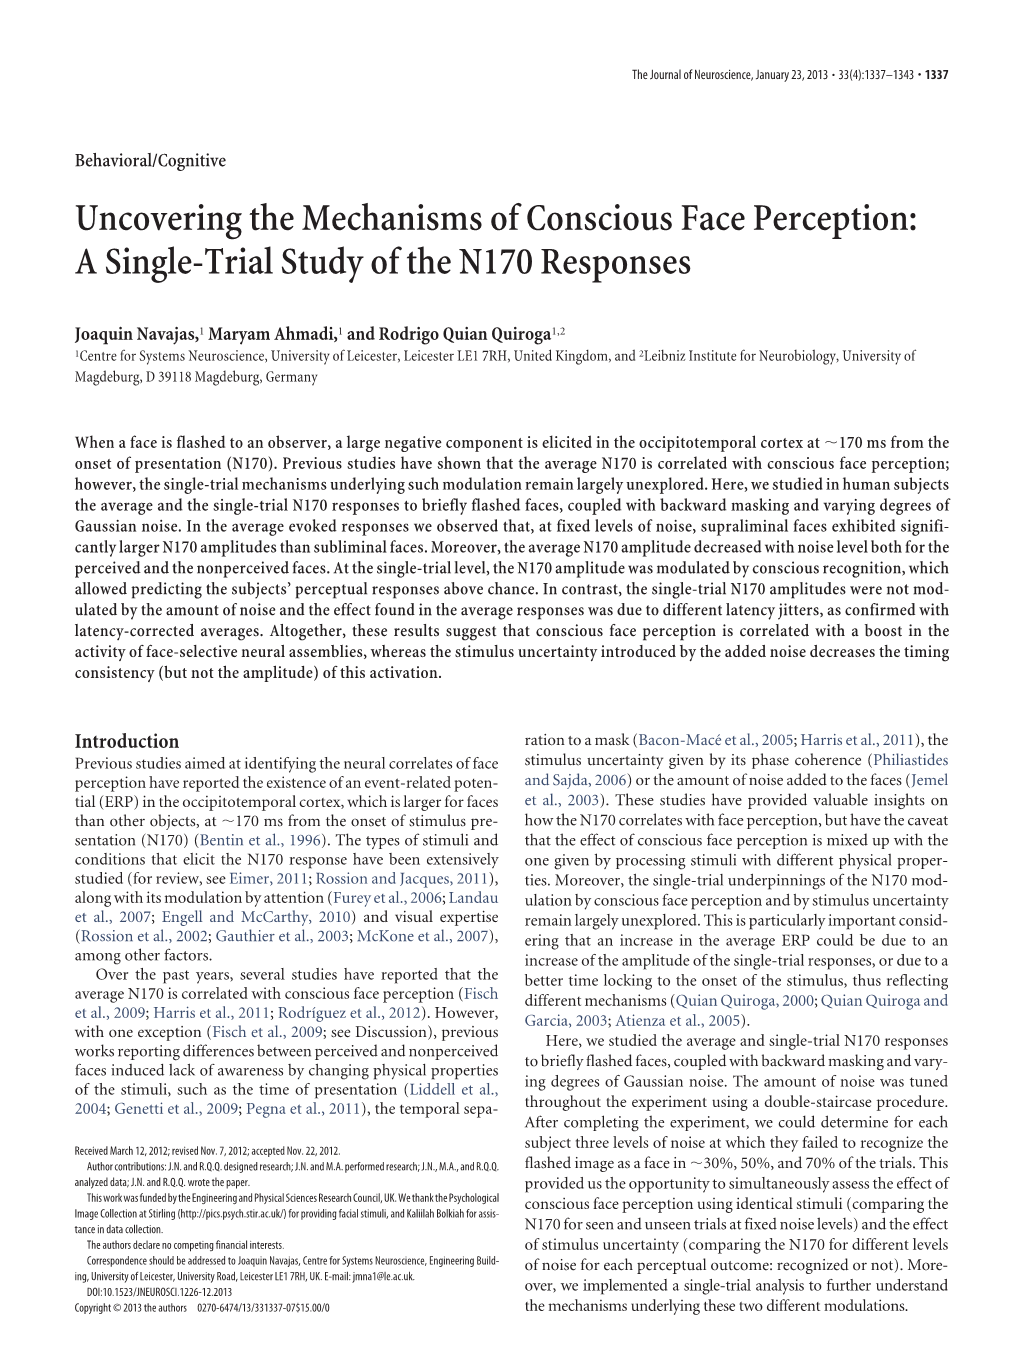 Uncovering the Mechanisms of Conscious Face Perception: a Single-Trial Study of the N170 Responses